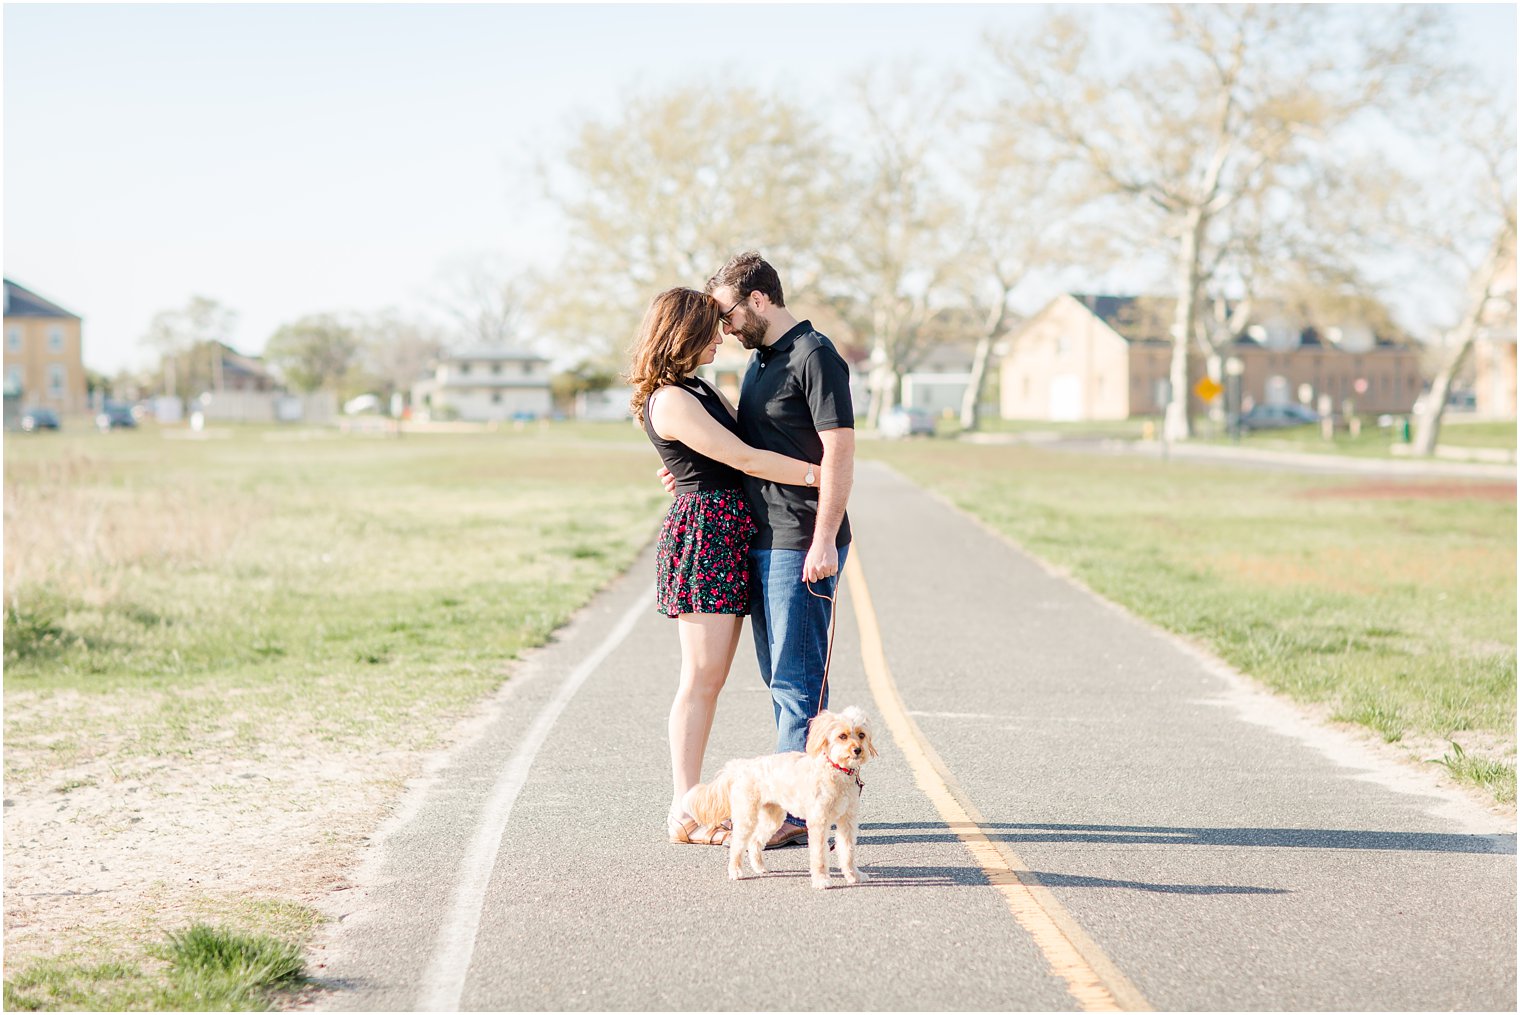 Romantic photo of couple with dog during engagement photos